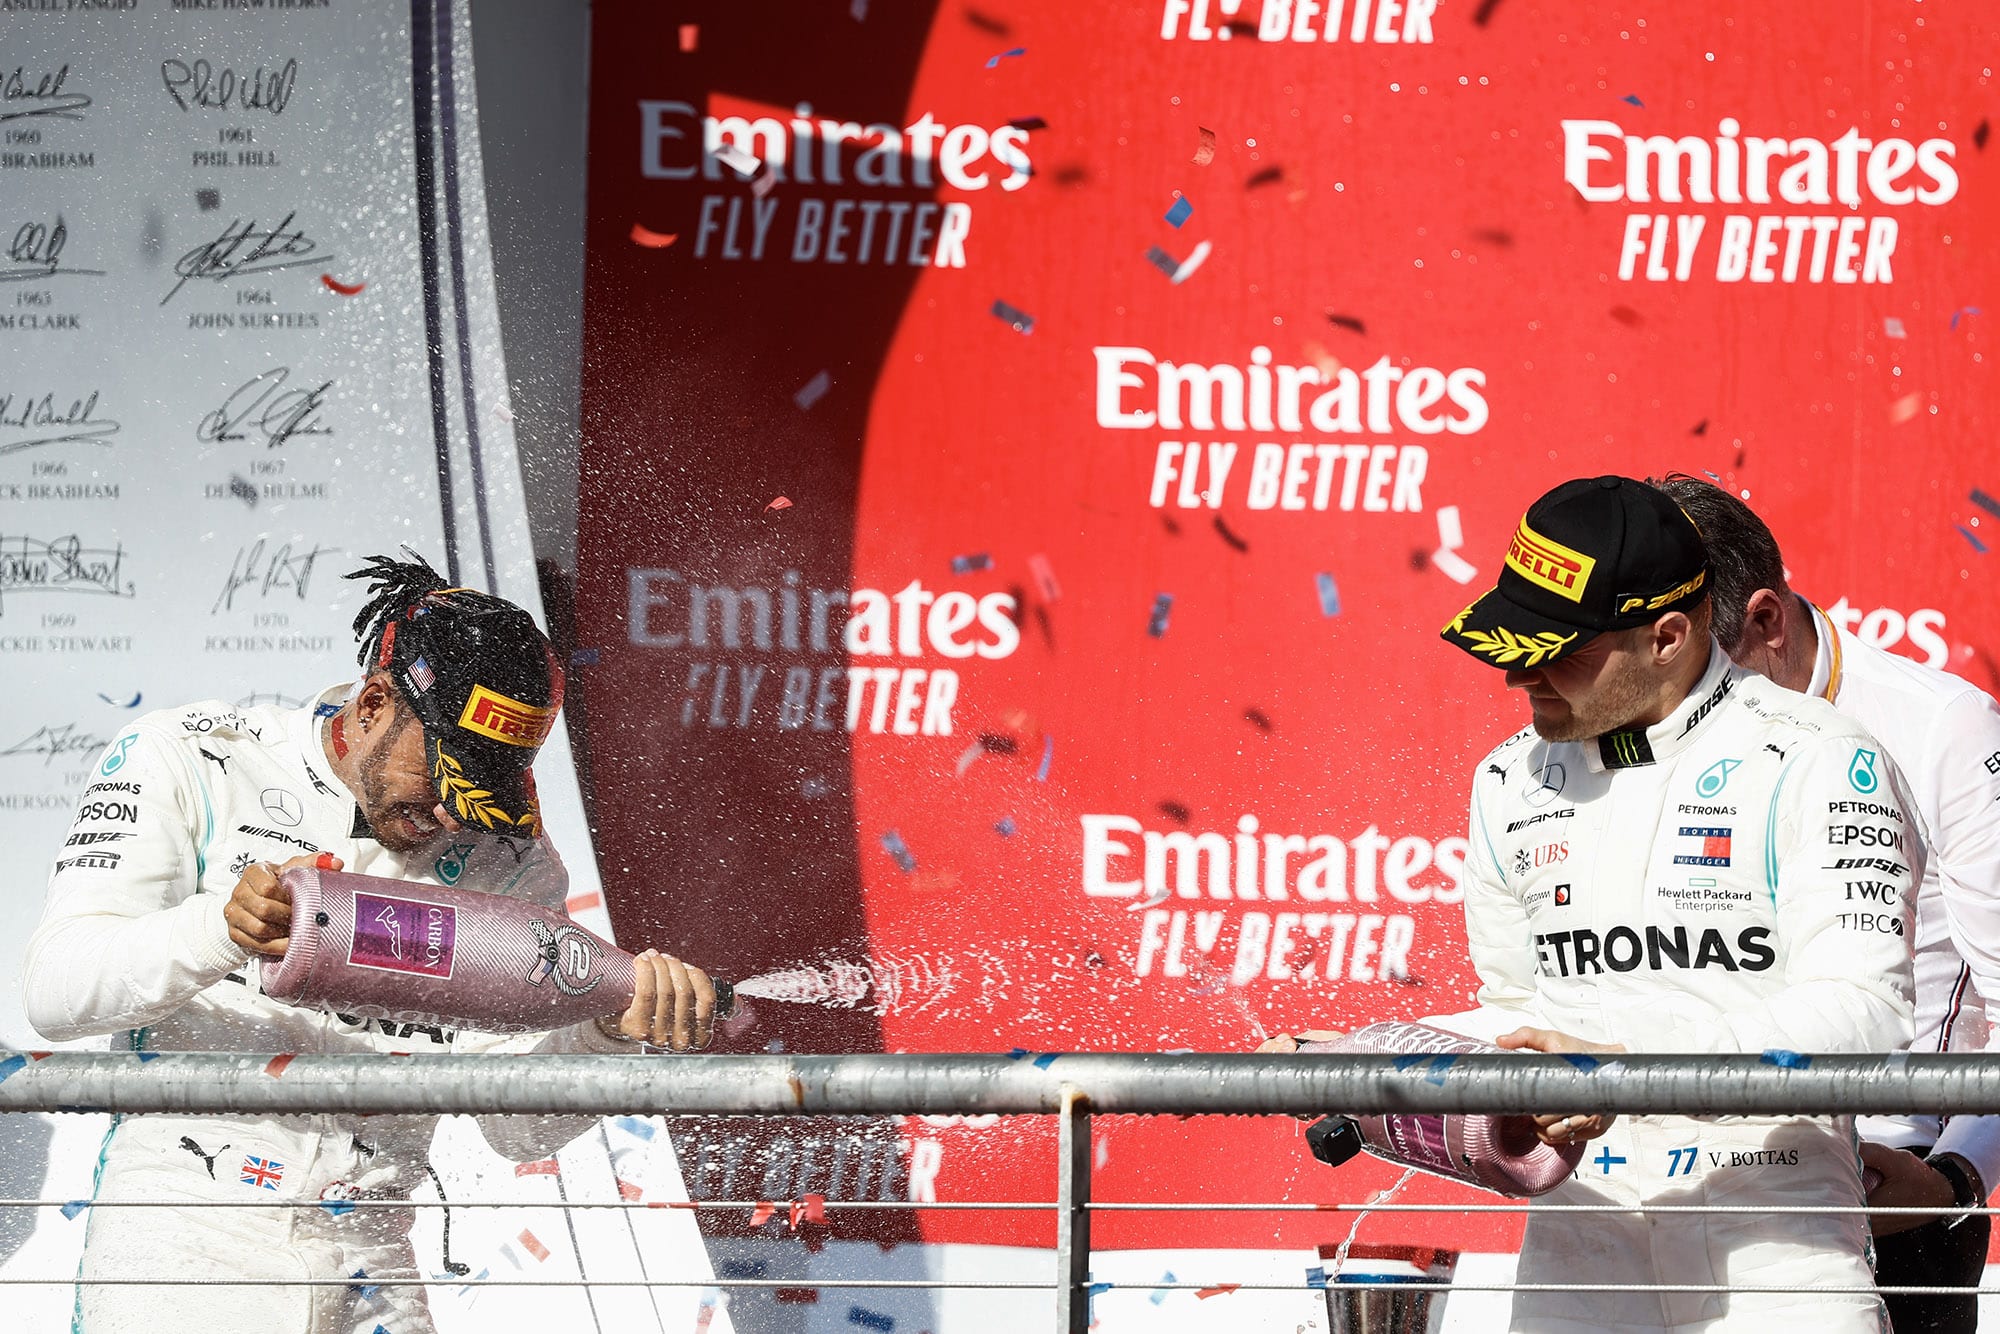 Lewis Hamilton and Valtteri Bottas spray champagne on the podium after the 2019 United States Grand Prix